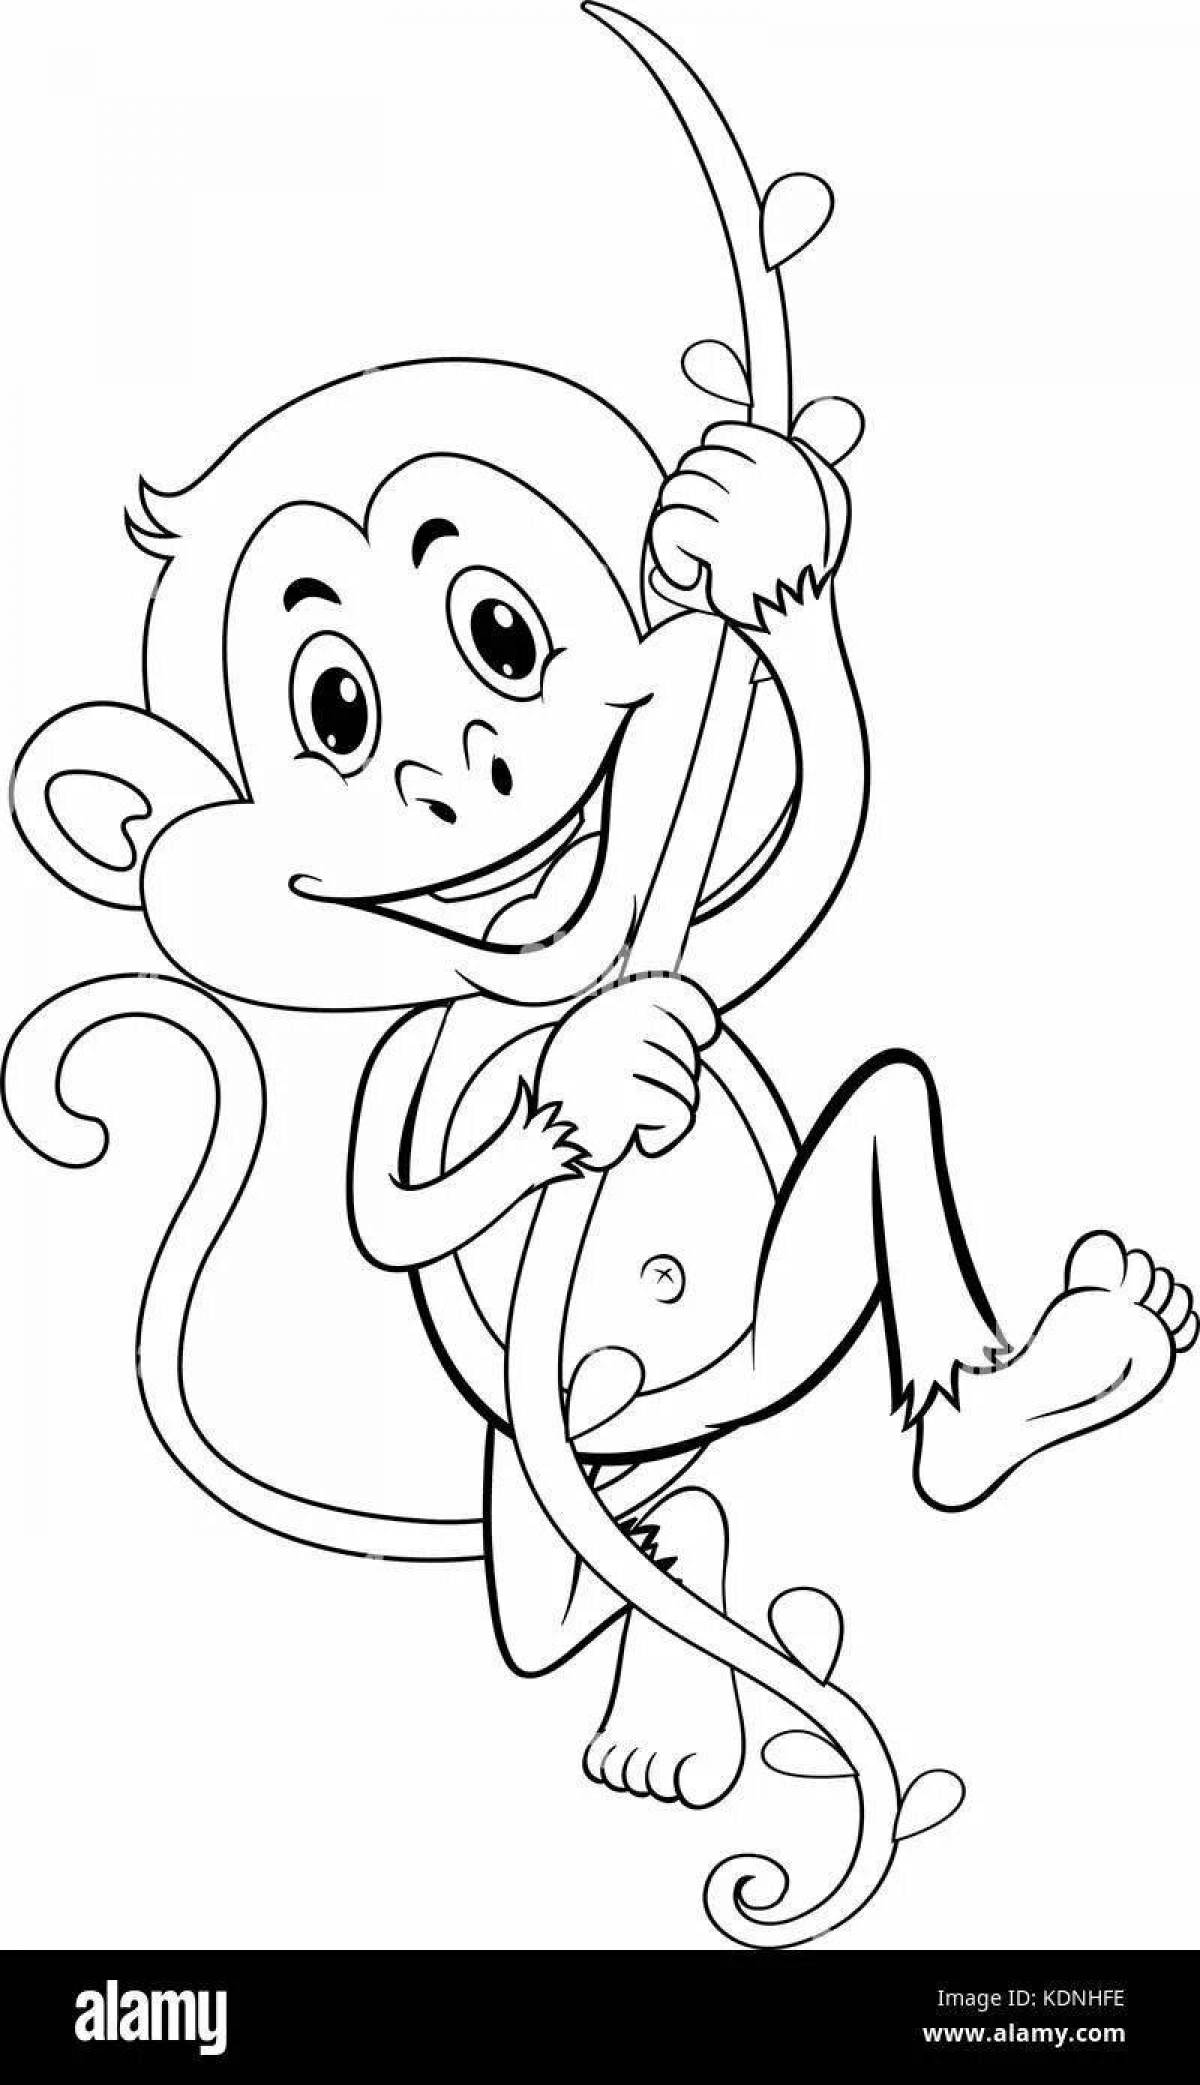 Zitkov's monkey coloring book